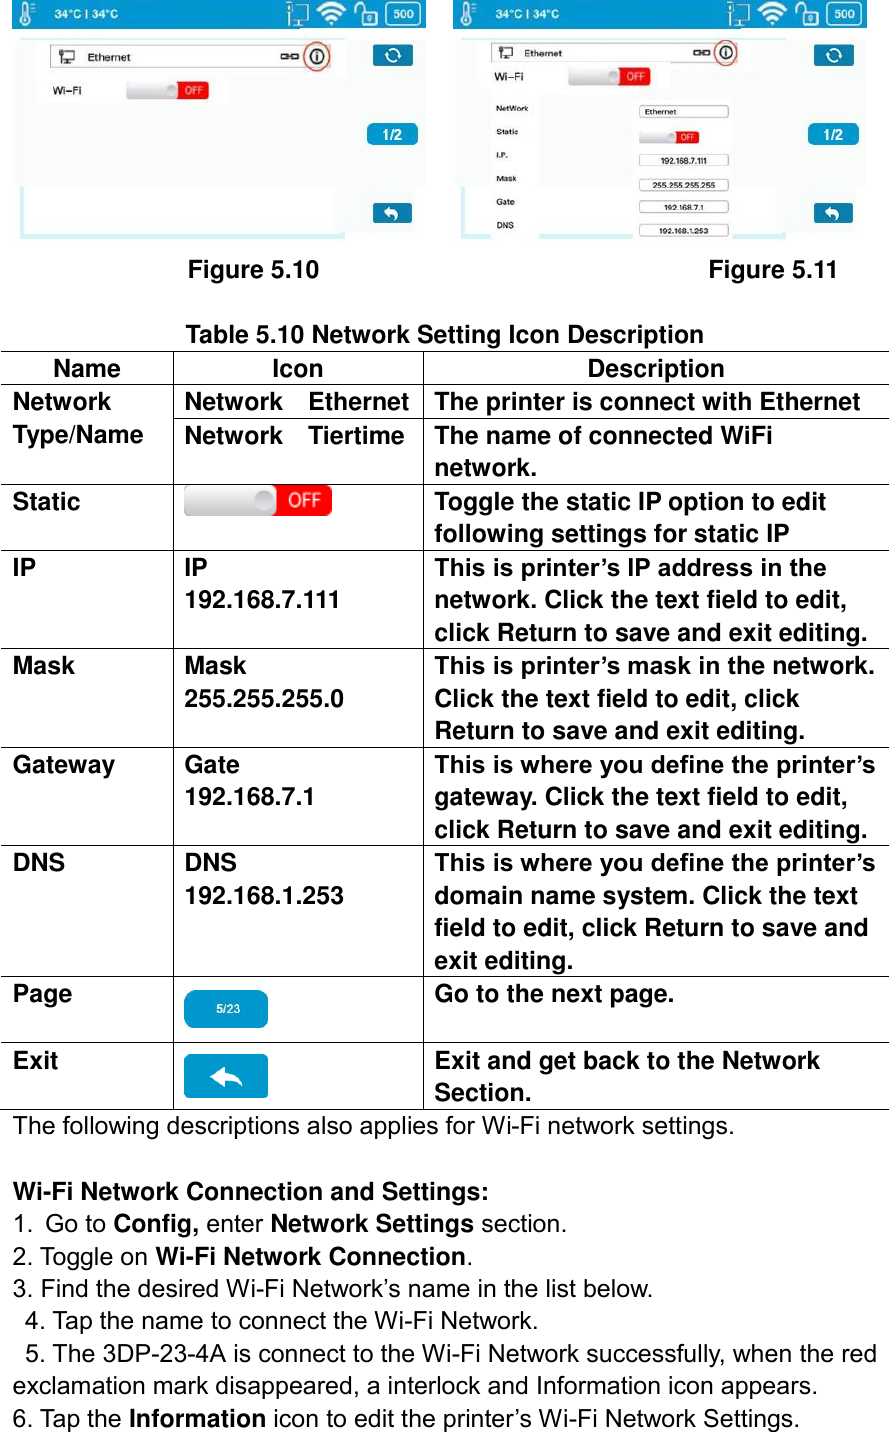                    Figure 5.10                                                              Figure 5.11  Table 5.10 Network Setting Icon Description Name Icon Description Network Type/Name Network    Ethernet The printer is connect with Ethernet Network    Tiertime The name of connected WiFi network. Static  Toggle the static IP option to edit following settings for static IP IP IP      192.168.7.111 This is printer’s IP address in the network. Click the text field to edit, click Return to save and exit editing. Mask Mask     255.255.255.0 This is printer’s mask in the network. Click the text field to edit, click Return to save and exit editing. Gateway Gate       192.168.7.1 This is where you define the printer’s gateway. Click the text field to edit, click Return to save and exit editing. DNS DNS       192.168.1.253 This is where you define the printer’s domain name system. Click the text field to edit, click Return to save and exit editing. Page  Go to the next page. Exit  Exit and get back to the Network Section. The following descriptions also applies for Wi-Fi network settings.  Wi-Fi Network Connection and Settings: 1. Go to Config, enter Network Settings section.   2. Toggle on Wi-Fi Network Connection.   3. Find the desired Wi-Fi Network’s name in the list below.   4. Tap the name to connect the Wi-Fi Network.   5. The 3DP-23-4A is connect to the Wi-Fi Network successfully, when the red exclamation mark disappeared, a interlock and Information icon appears.   6. Tap the Information icon to edit the printer’s Wi-Fi Network Settings. 